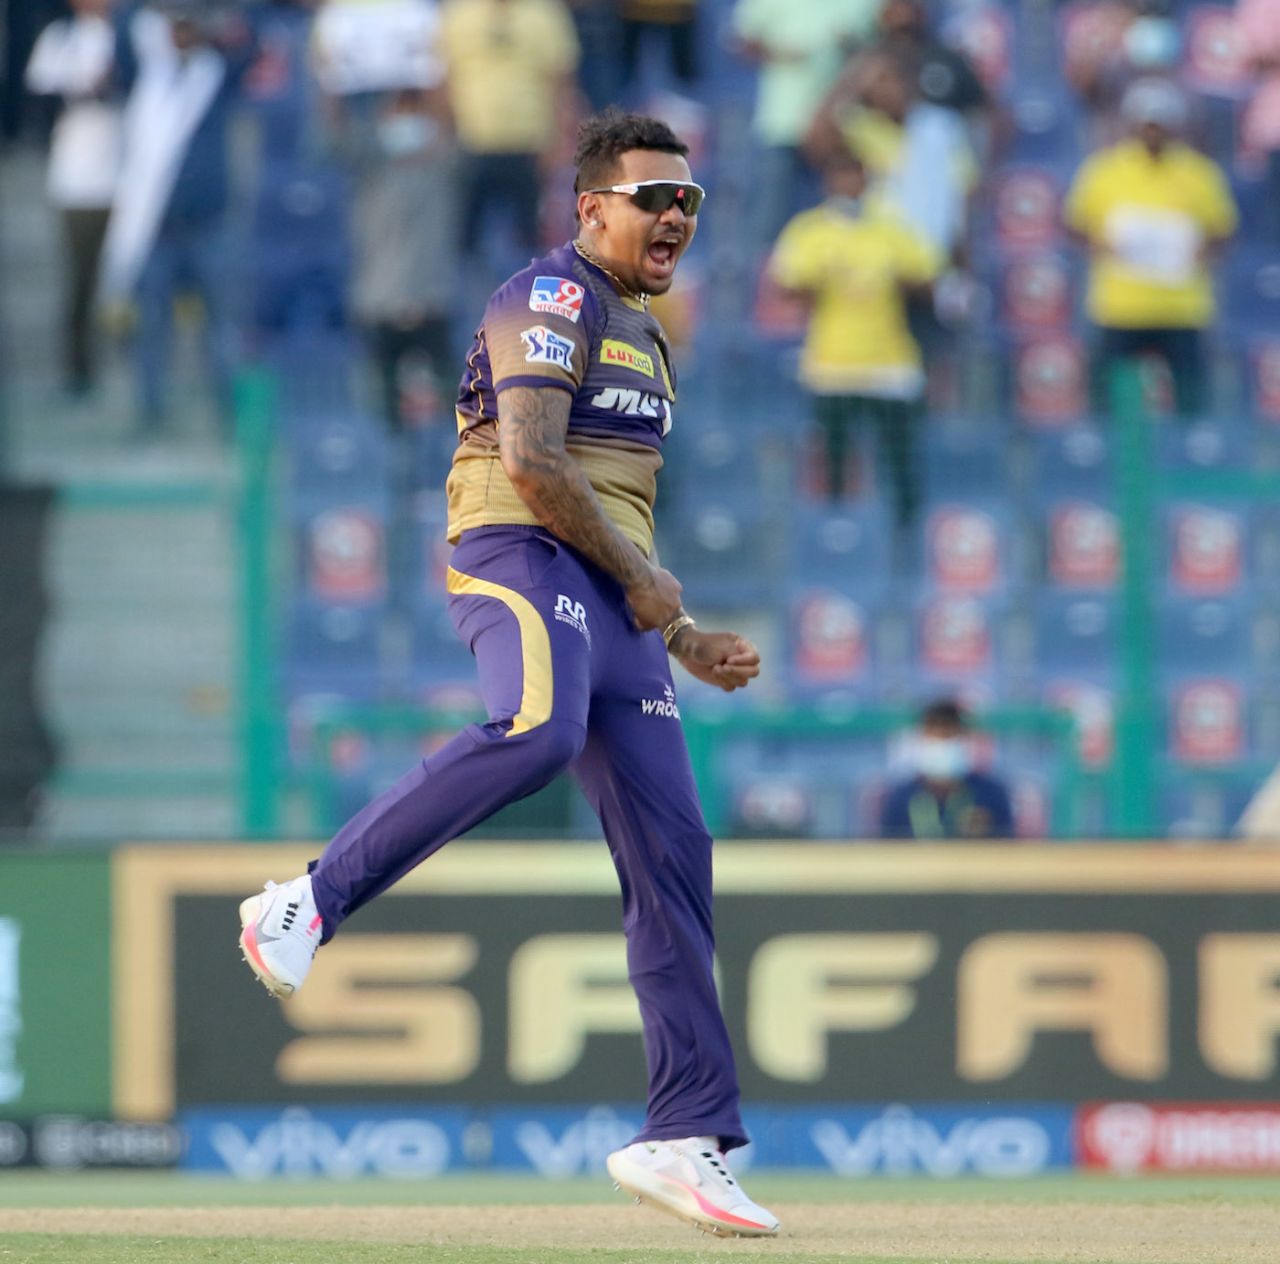 Sunil Narine took the game to the last ball with two wickets in the final over, Chennai Super Kings vs Kolkata Knight Riders, IPL 2021, Abu Dhabi, September 26, 2021